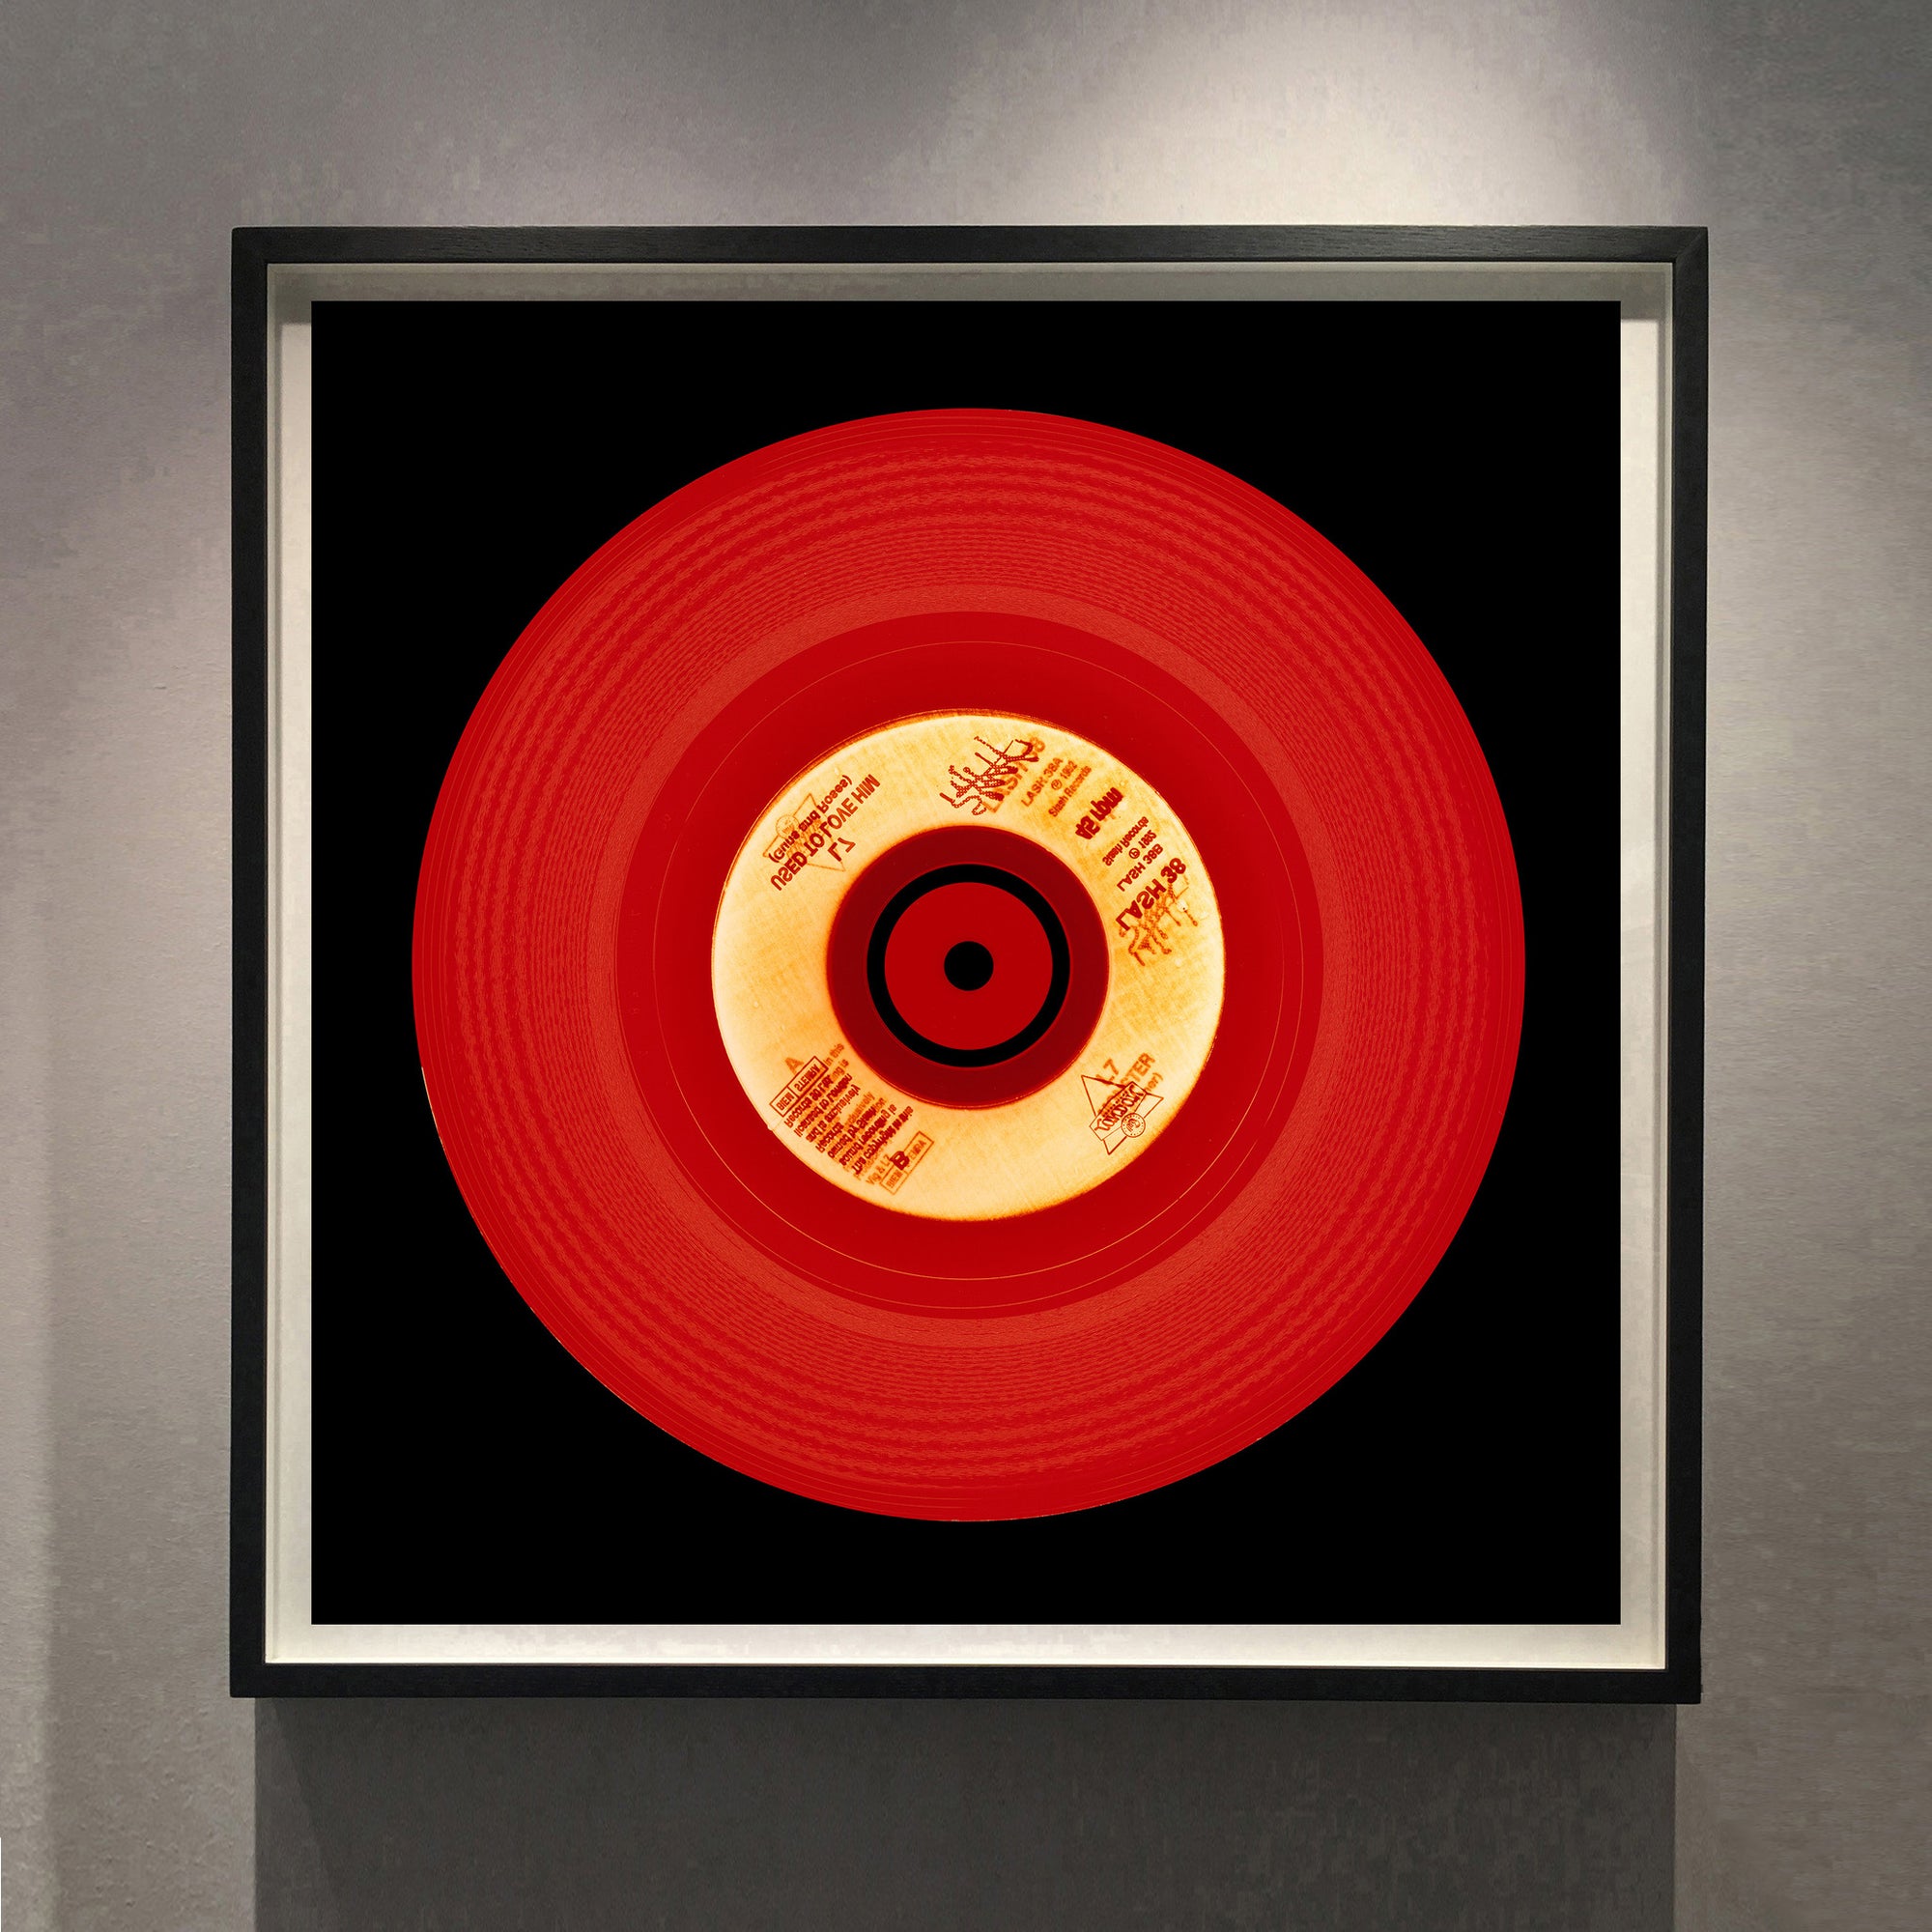 Photograph of a red vinyl record on a black background. Photographers Heidler and Heeps